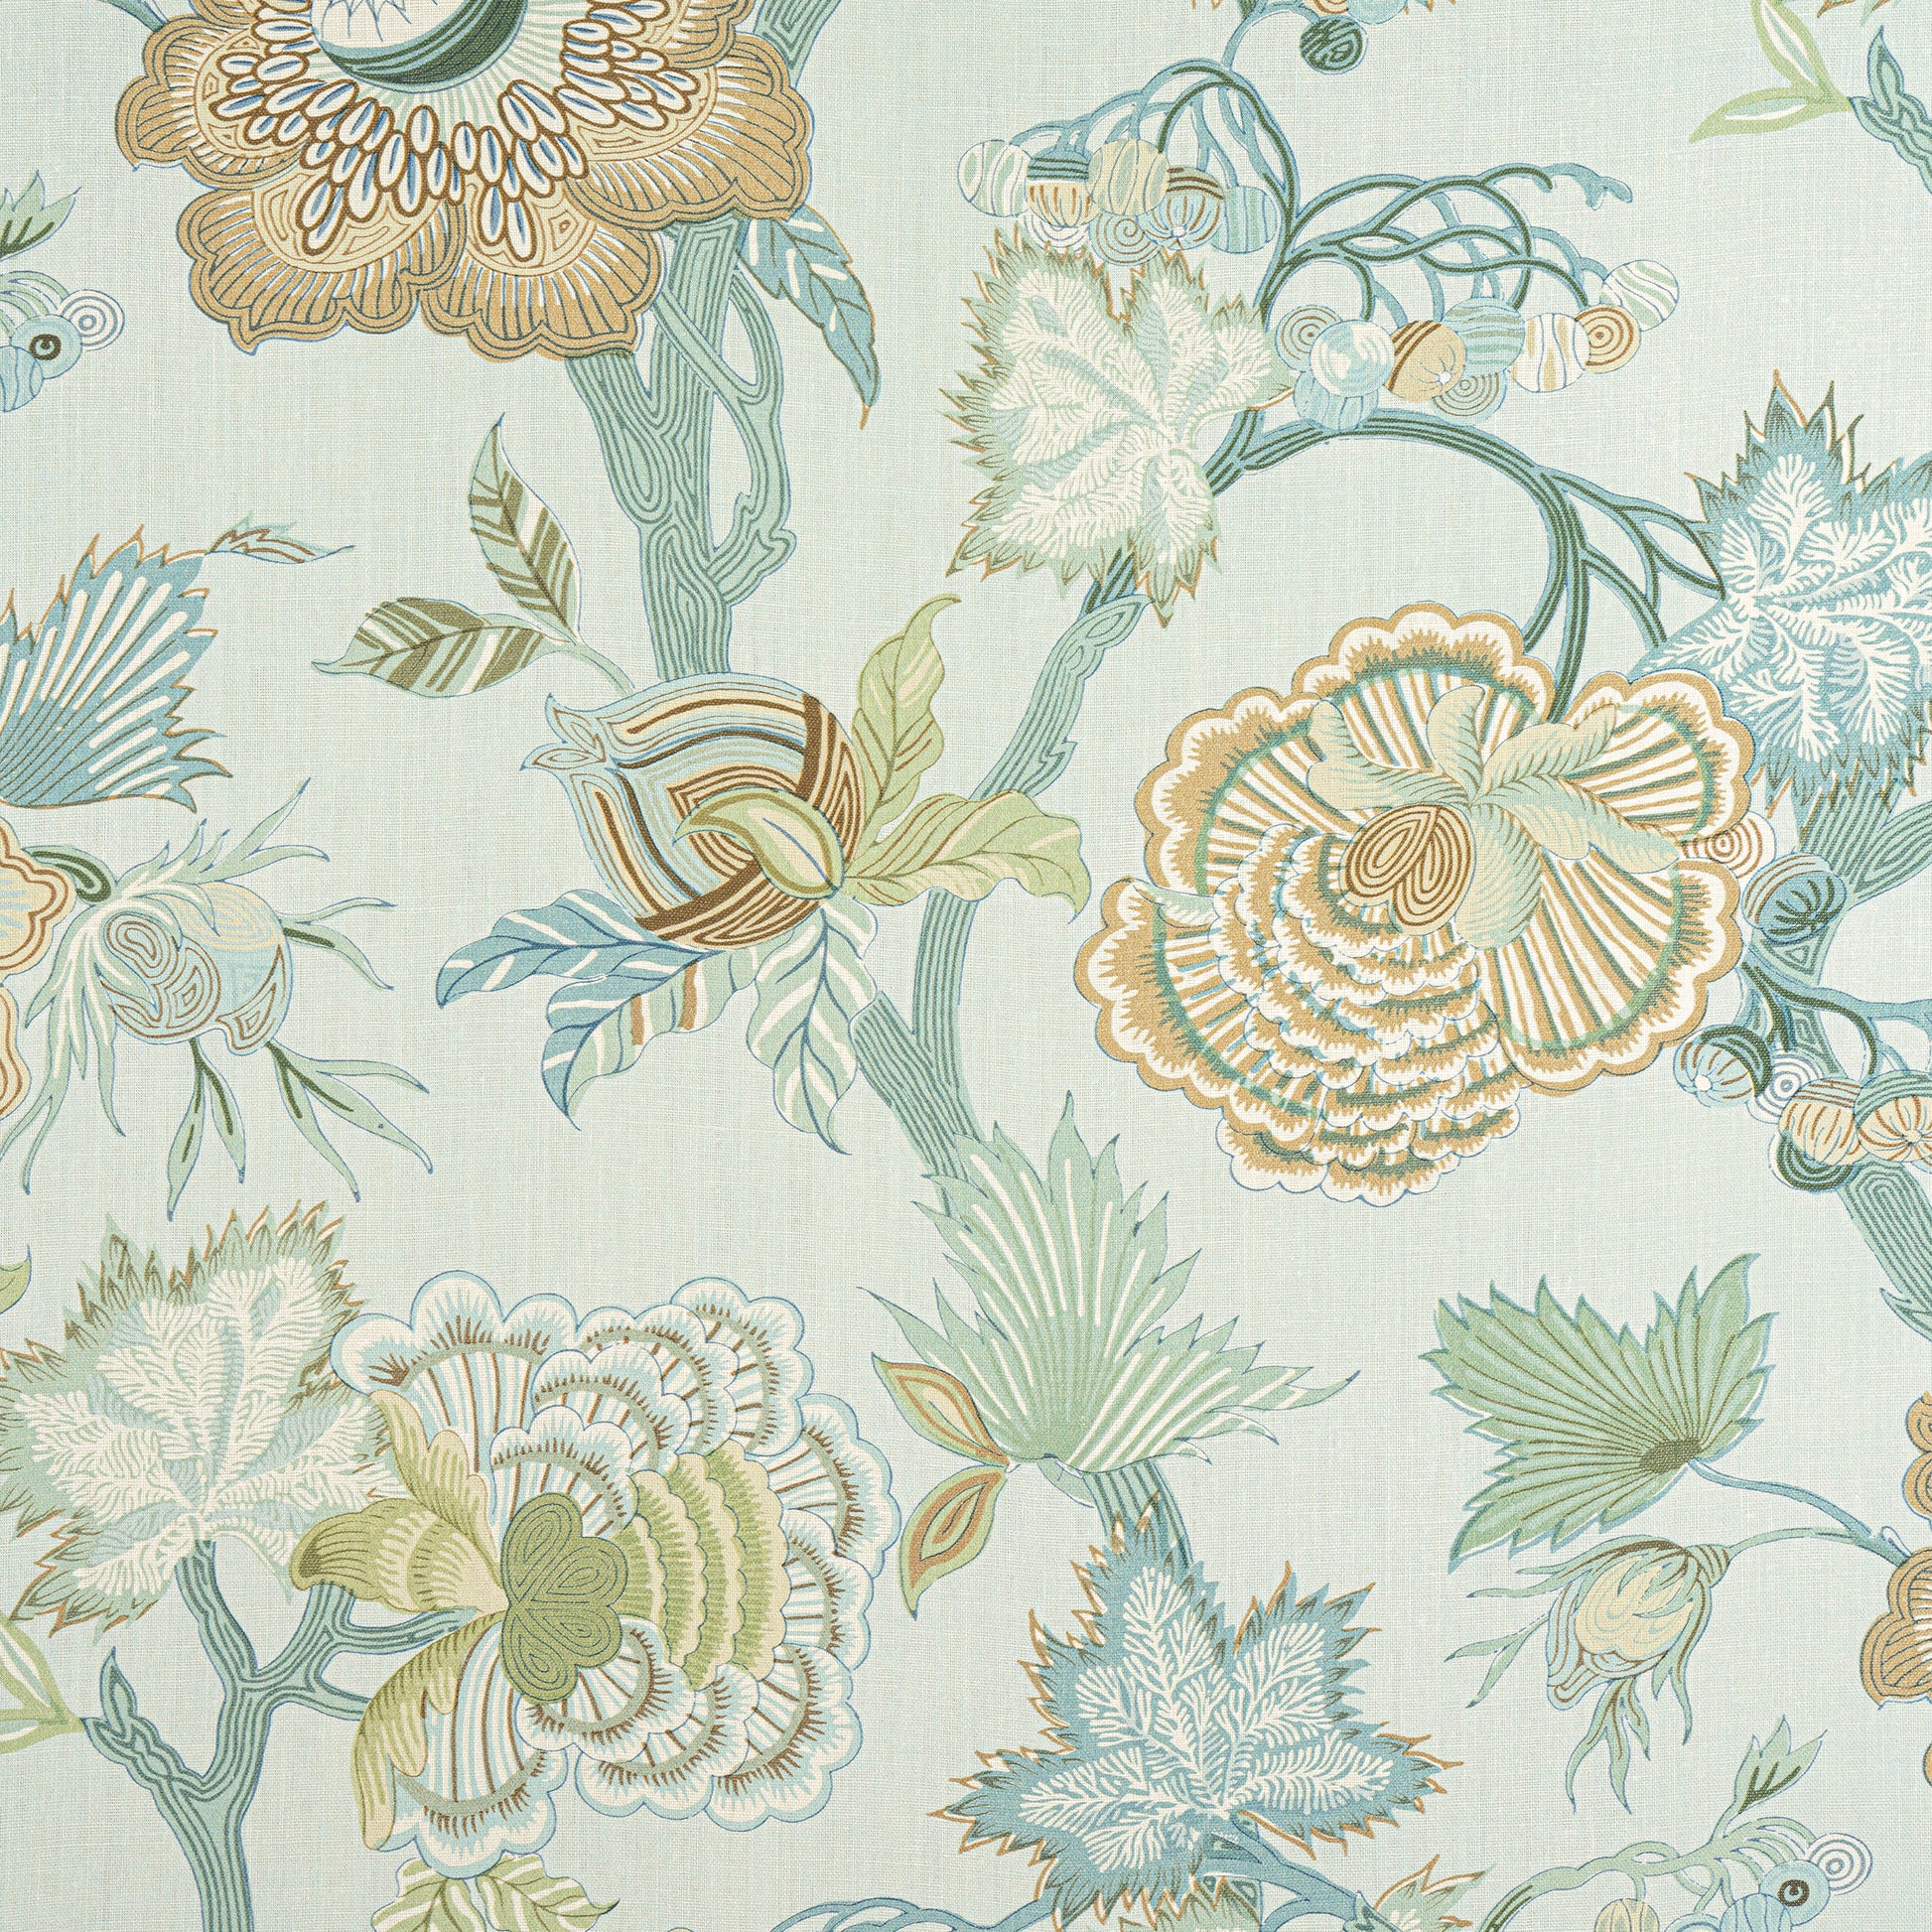 Purchase Thibaut Fabric Item# F936417 pattern name Indienne Jacobean color Seaglass and Gold